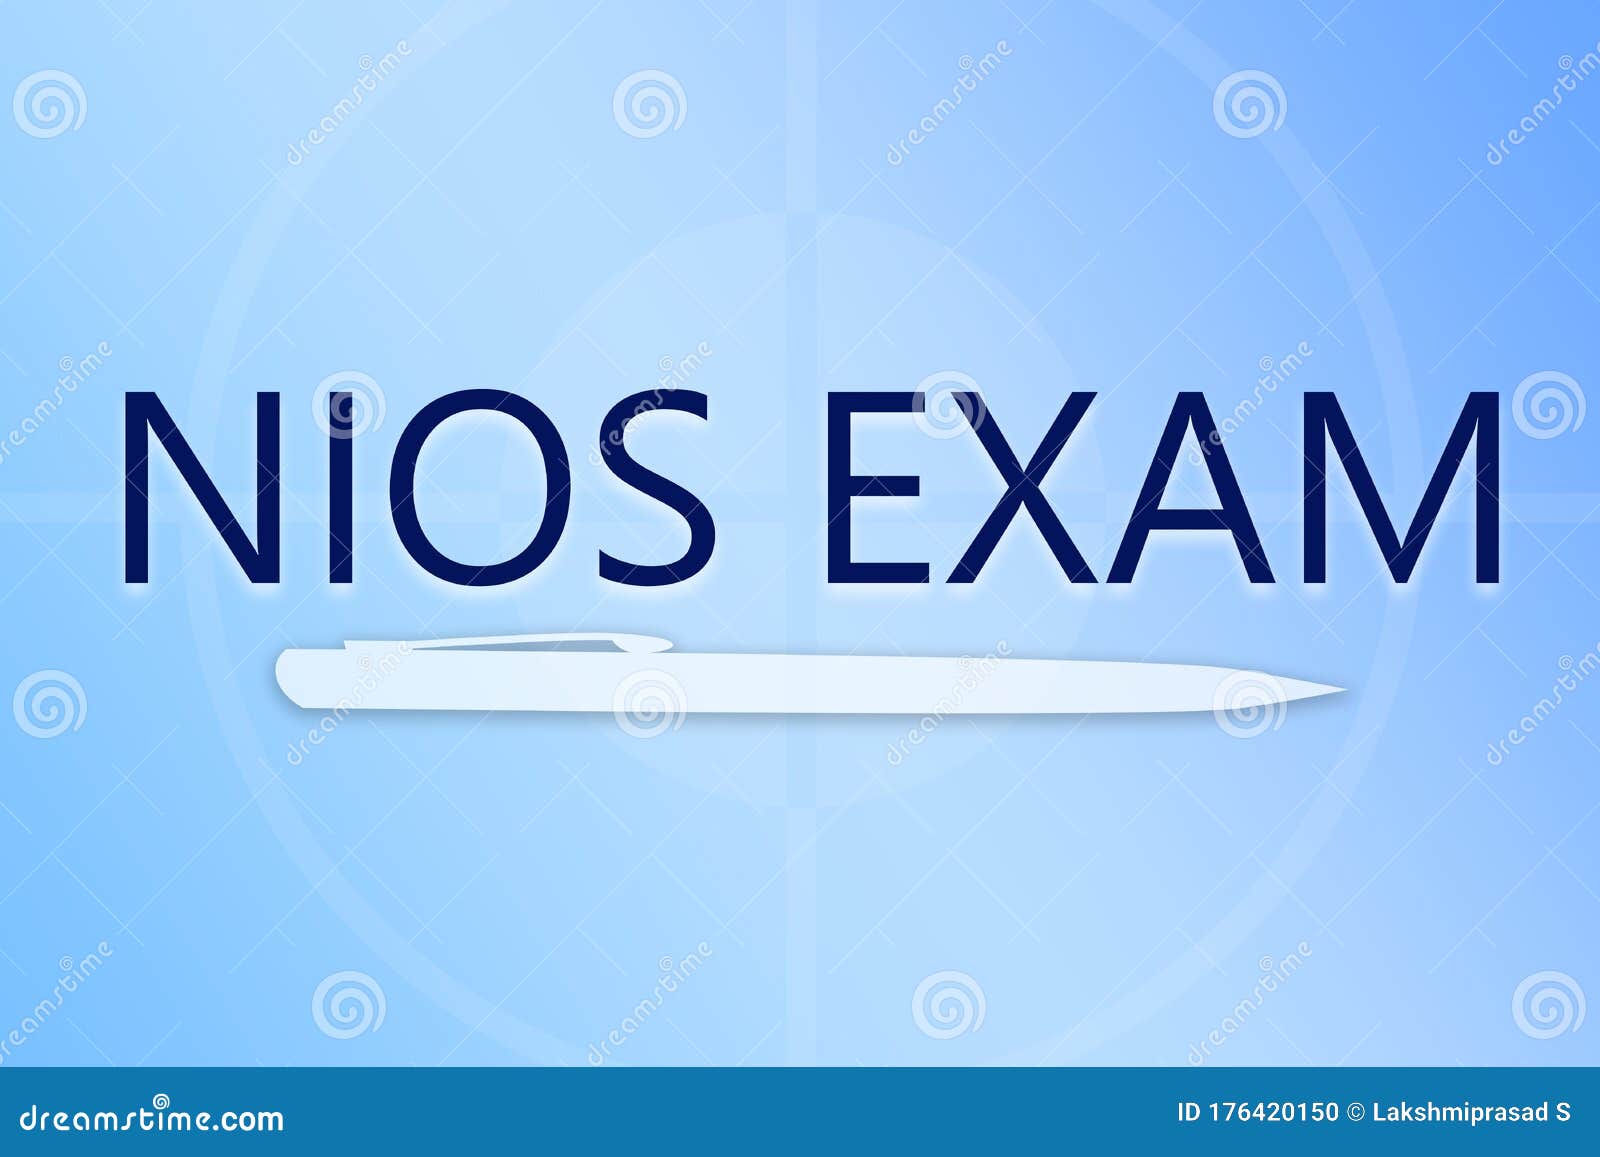 nios exam showing with pen and blue colourful background.